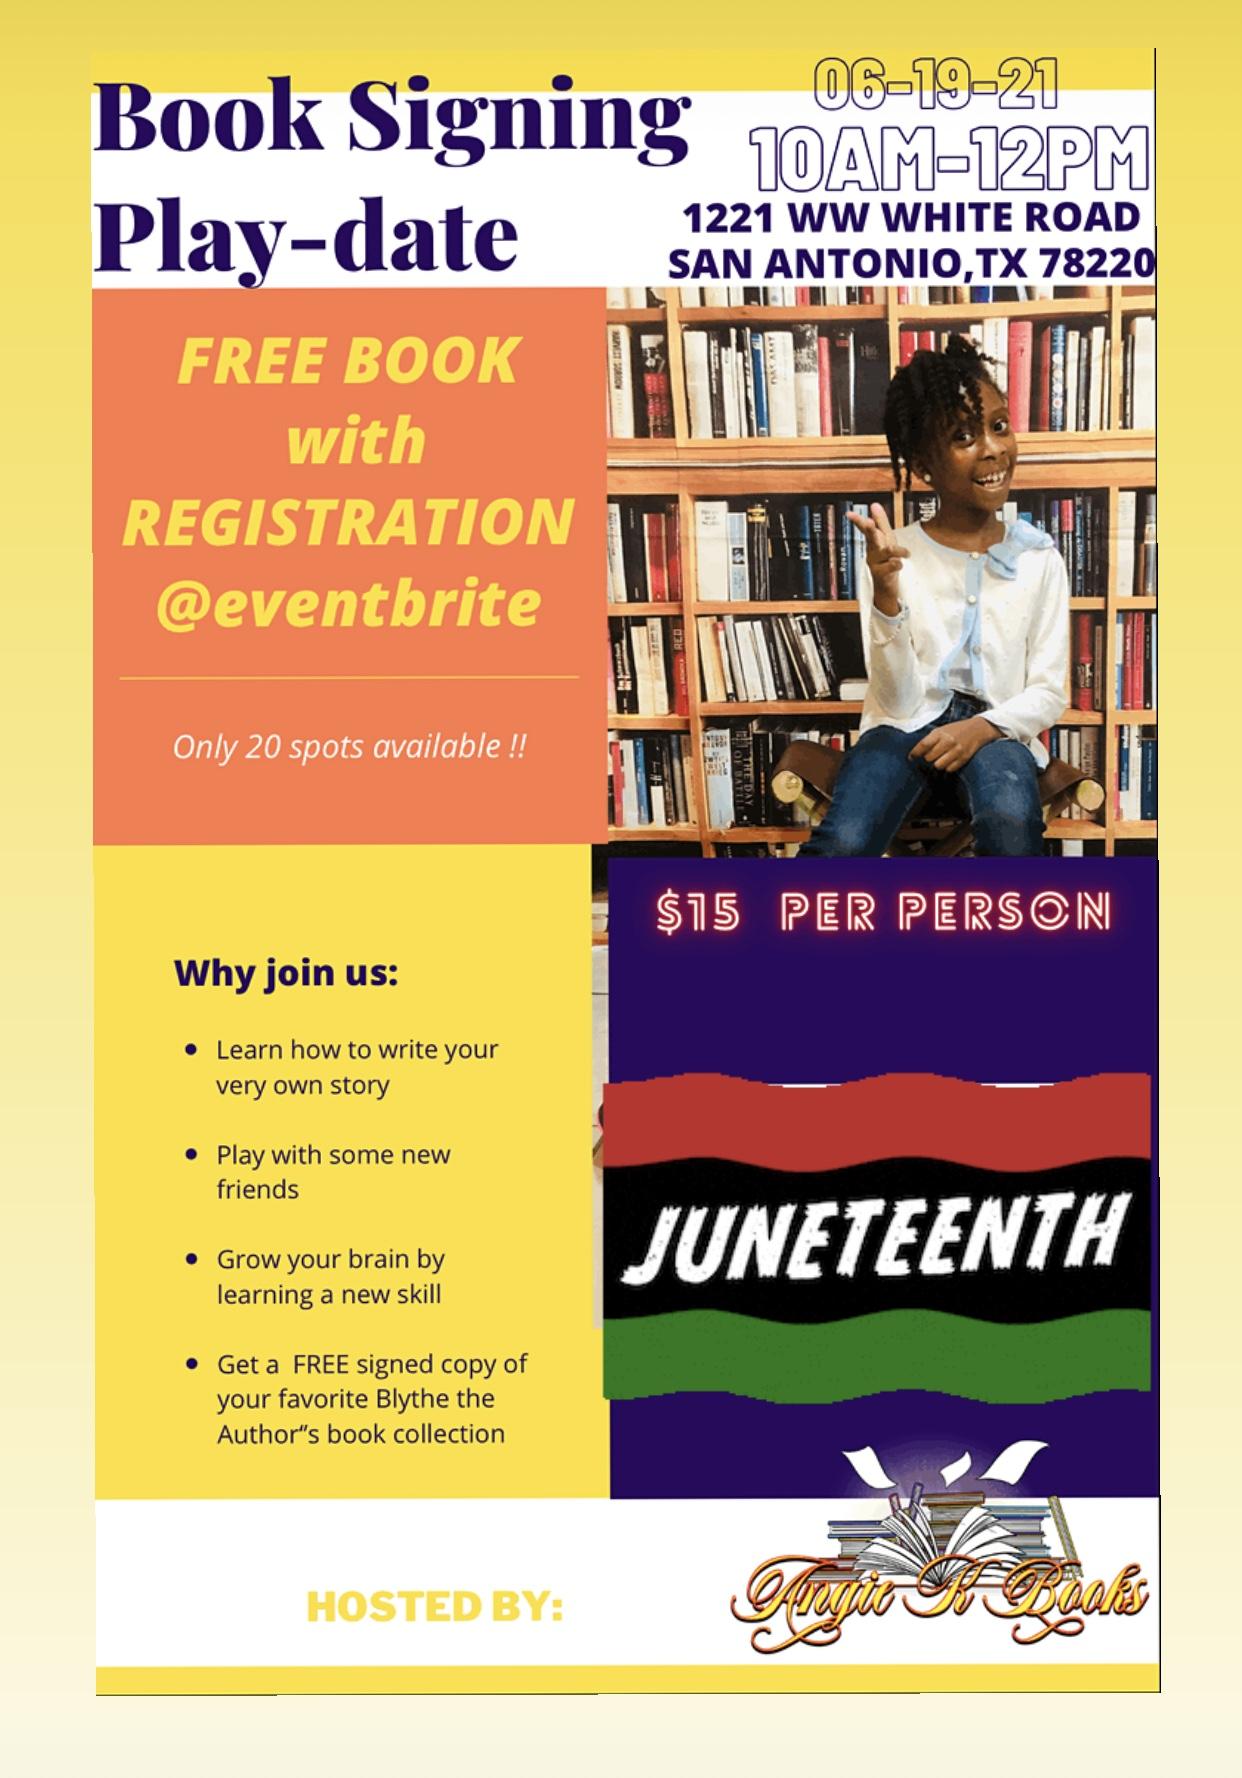 Juneteenth Book Signing Playdate